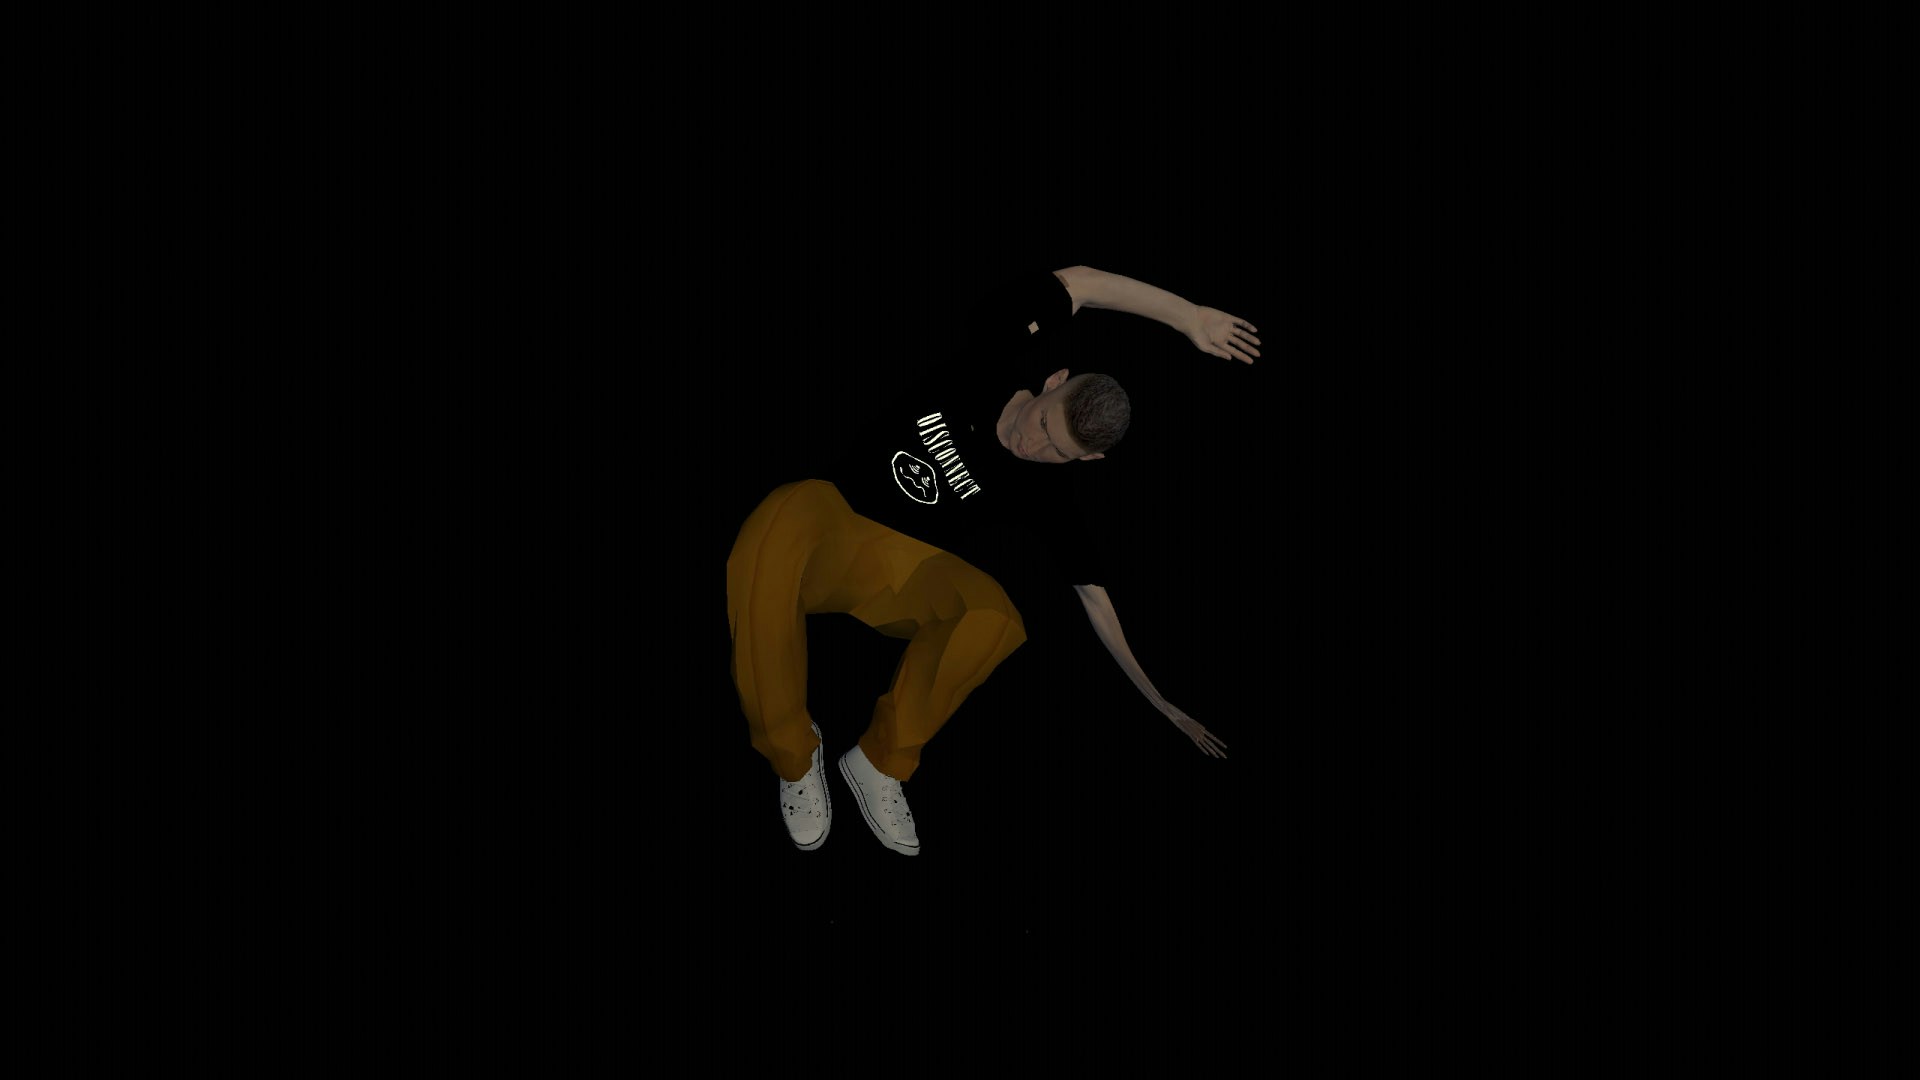 A virtual influencer levitating in space with a strange body pose.